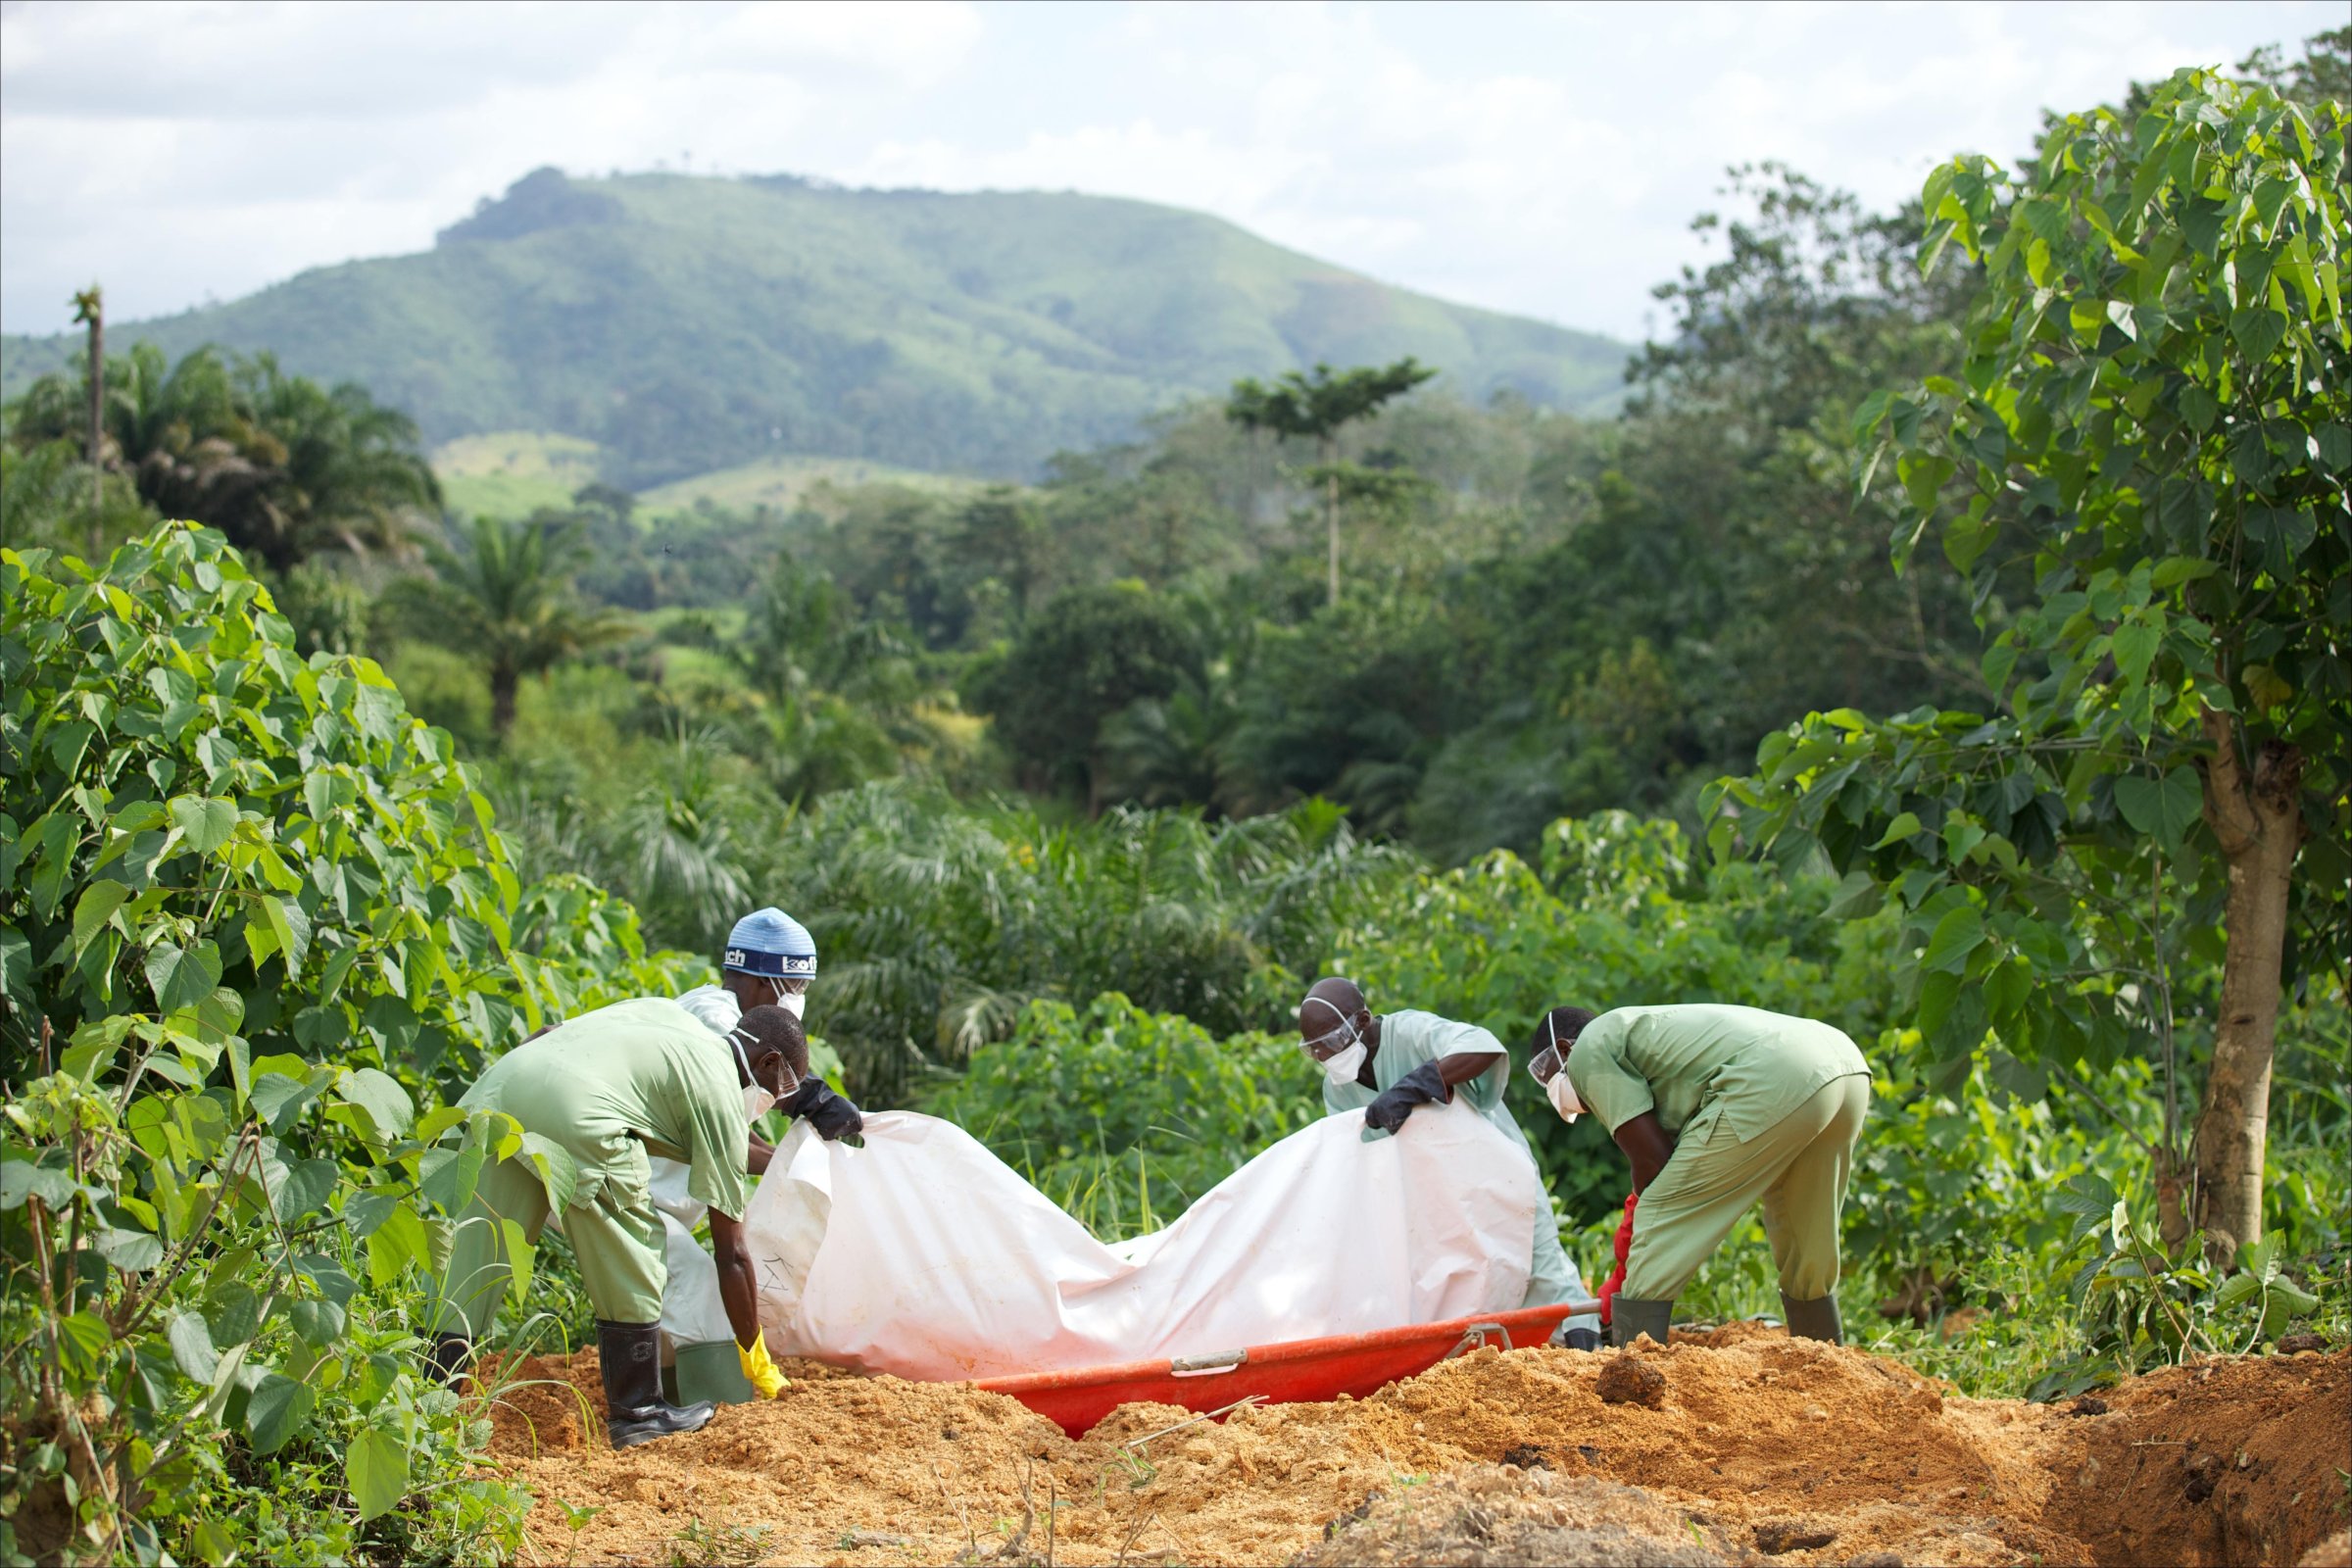 Red cross members from Guinea place an Ebola-infected body into a grave in a cemetery now overwhelmed with fresh graves in Gueckedou, Guinea on Oct. 17, 2014.